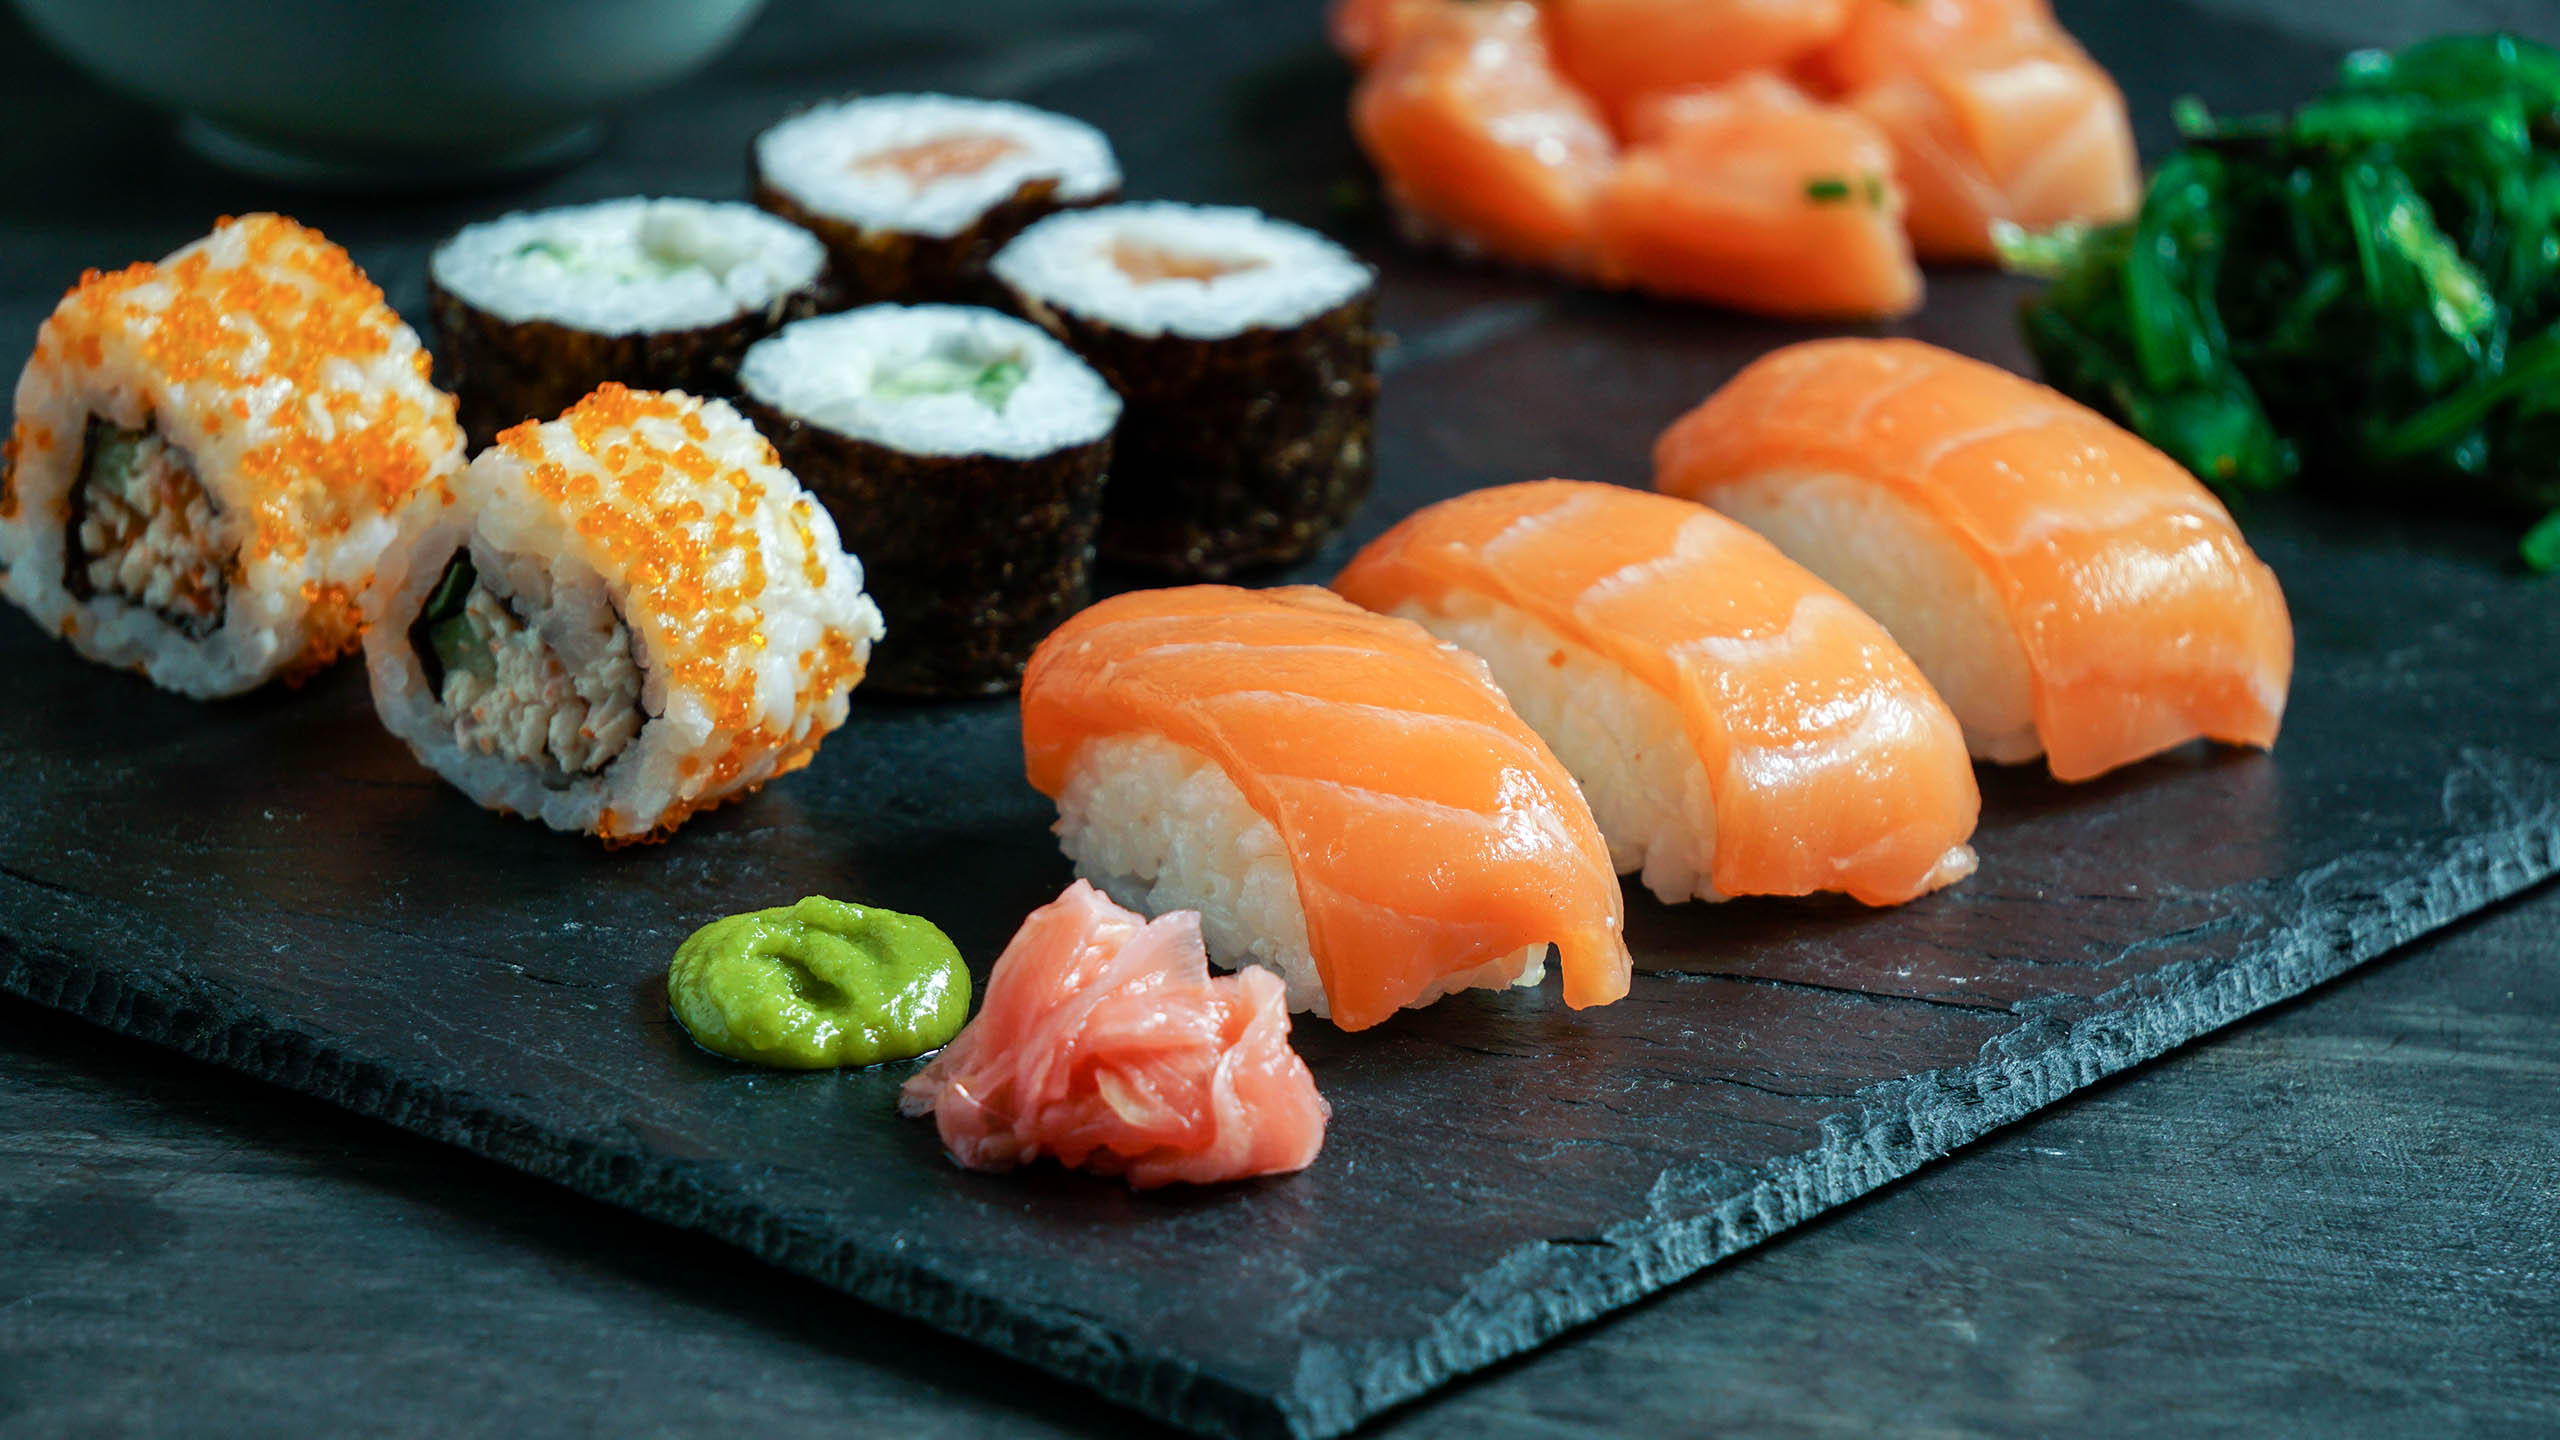 Dining Out on Sushi: The Basics of Eating Sushi in a Restaurant